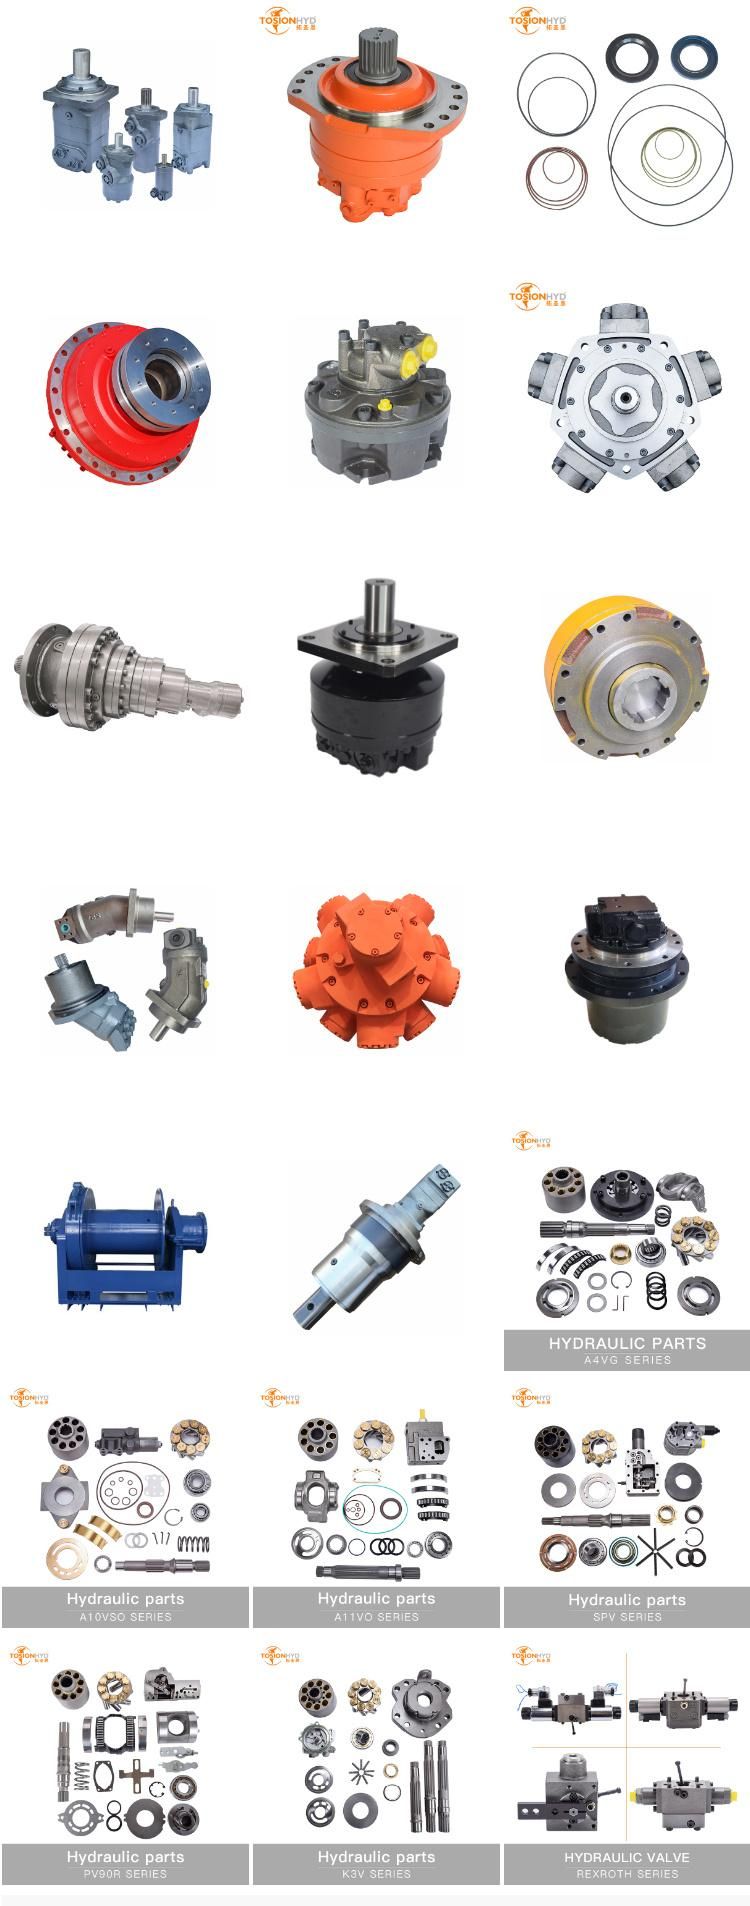 A2FM23 A2FM28 Hydraulic Motor Parts with Rexroth Spare Repair Kits